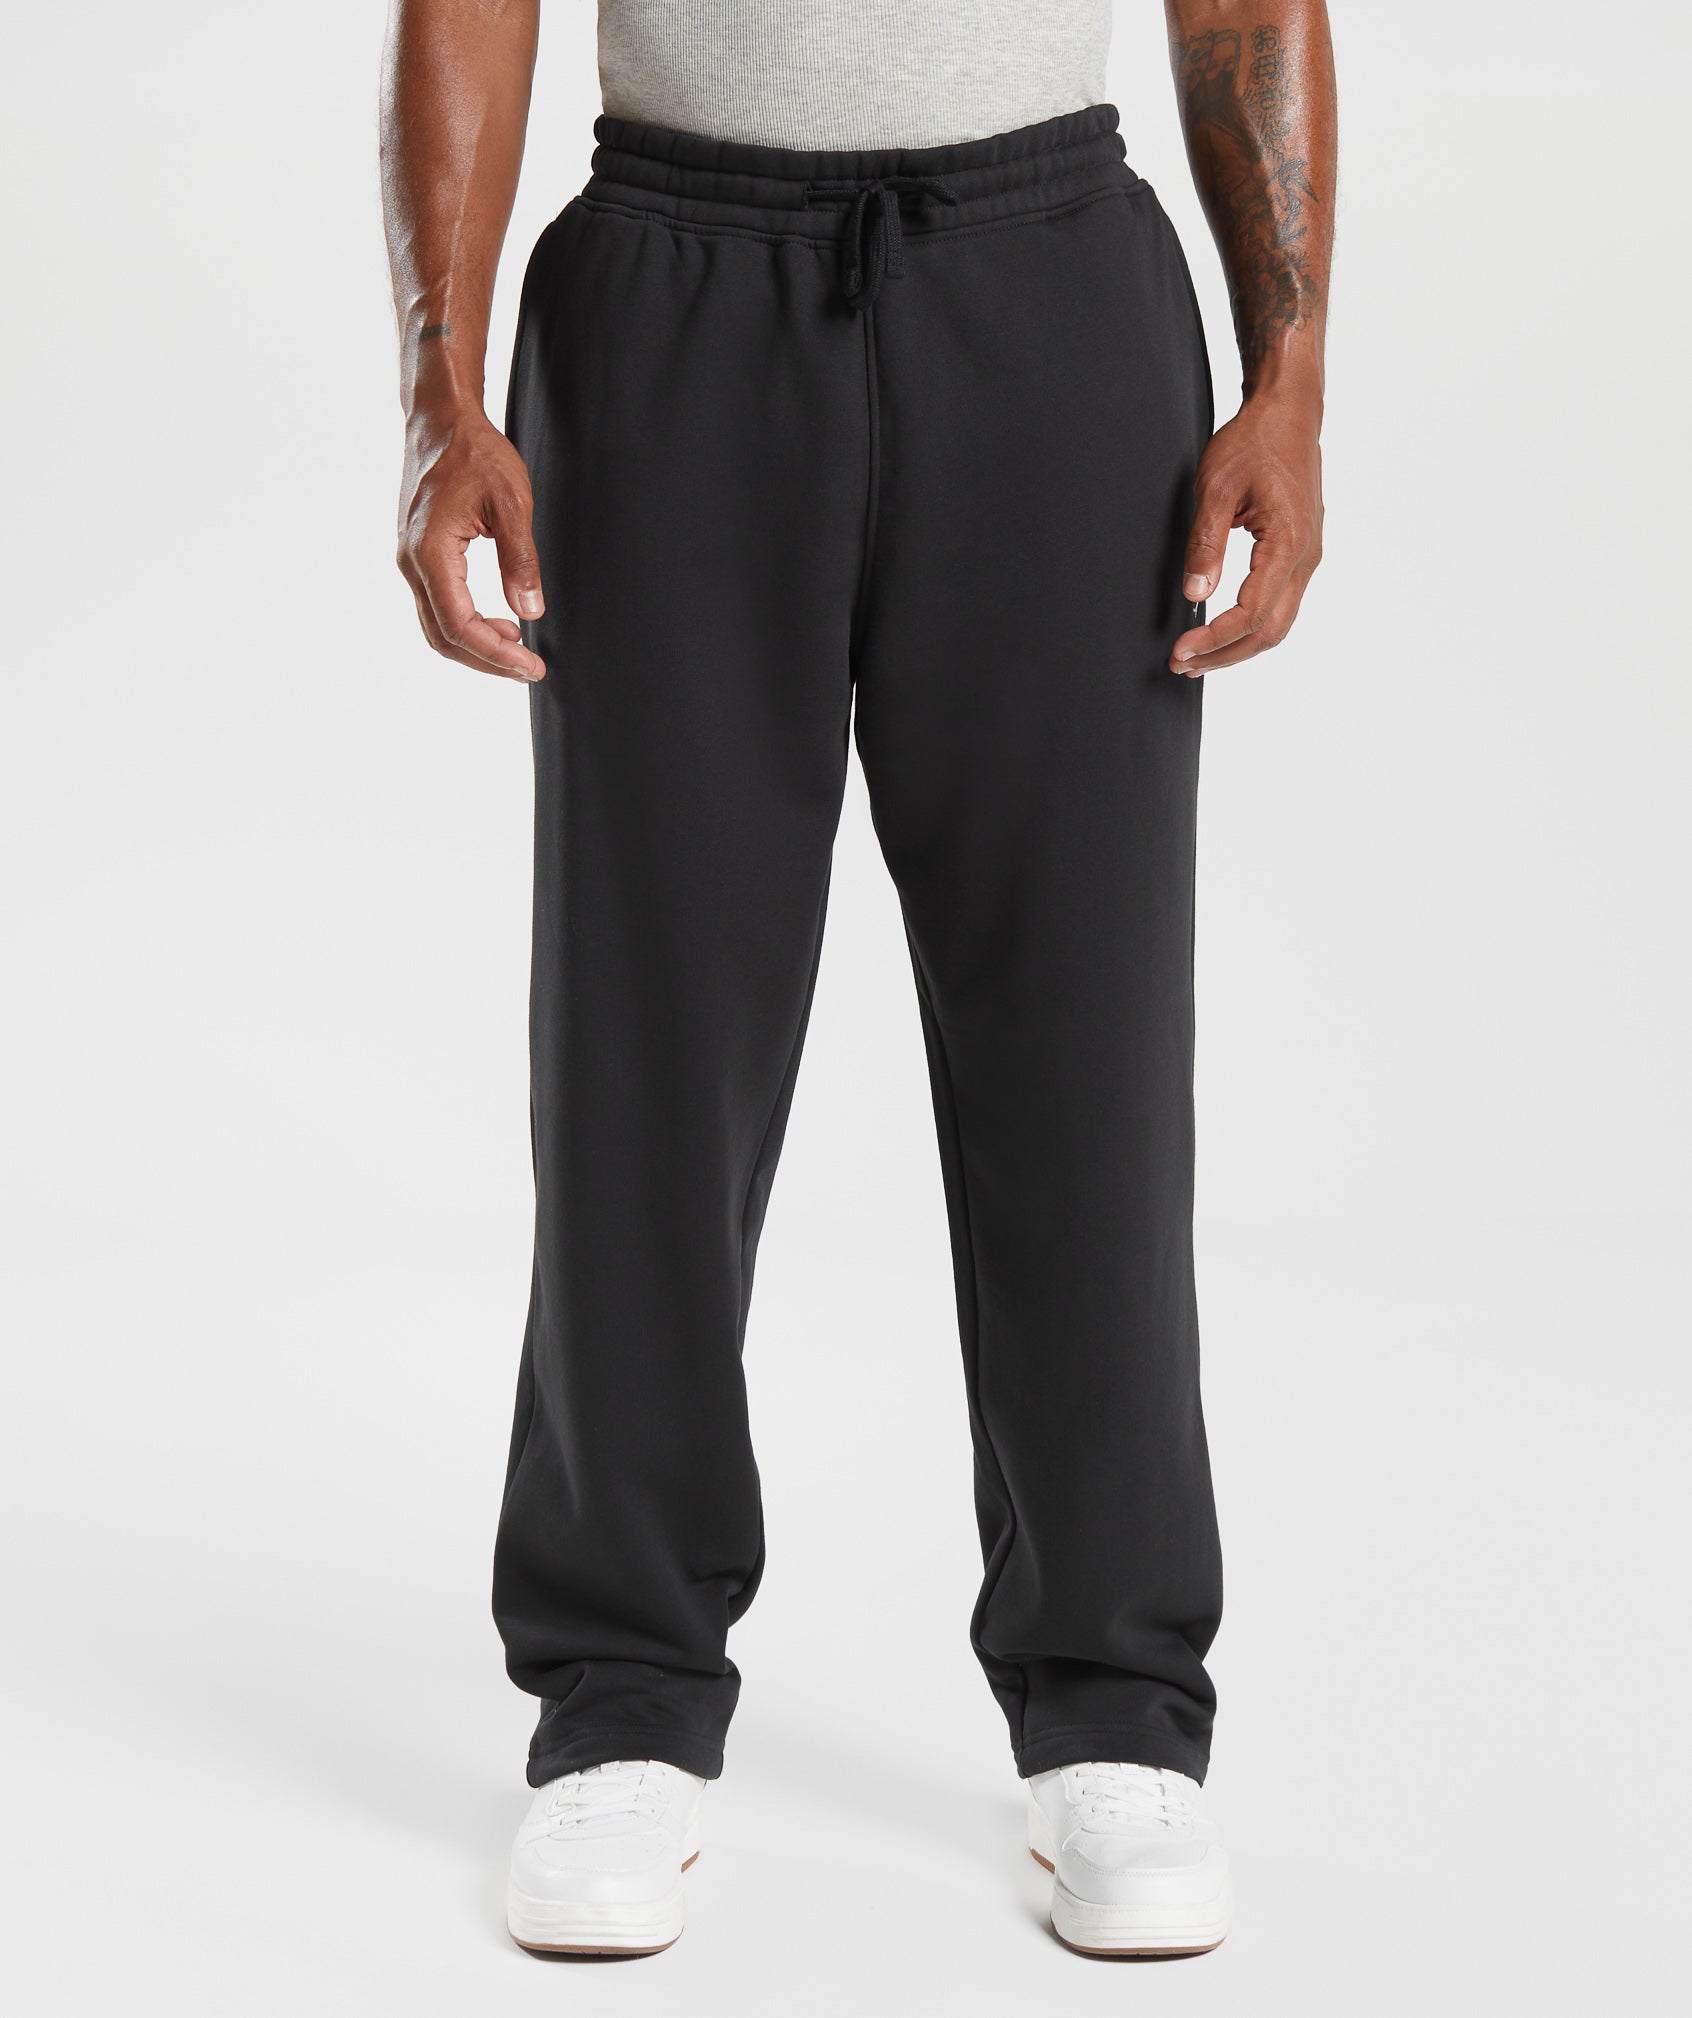 Men's Athleisure – Athleisure Clothes from Gymshark